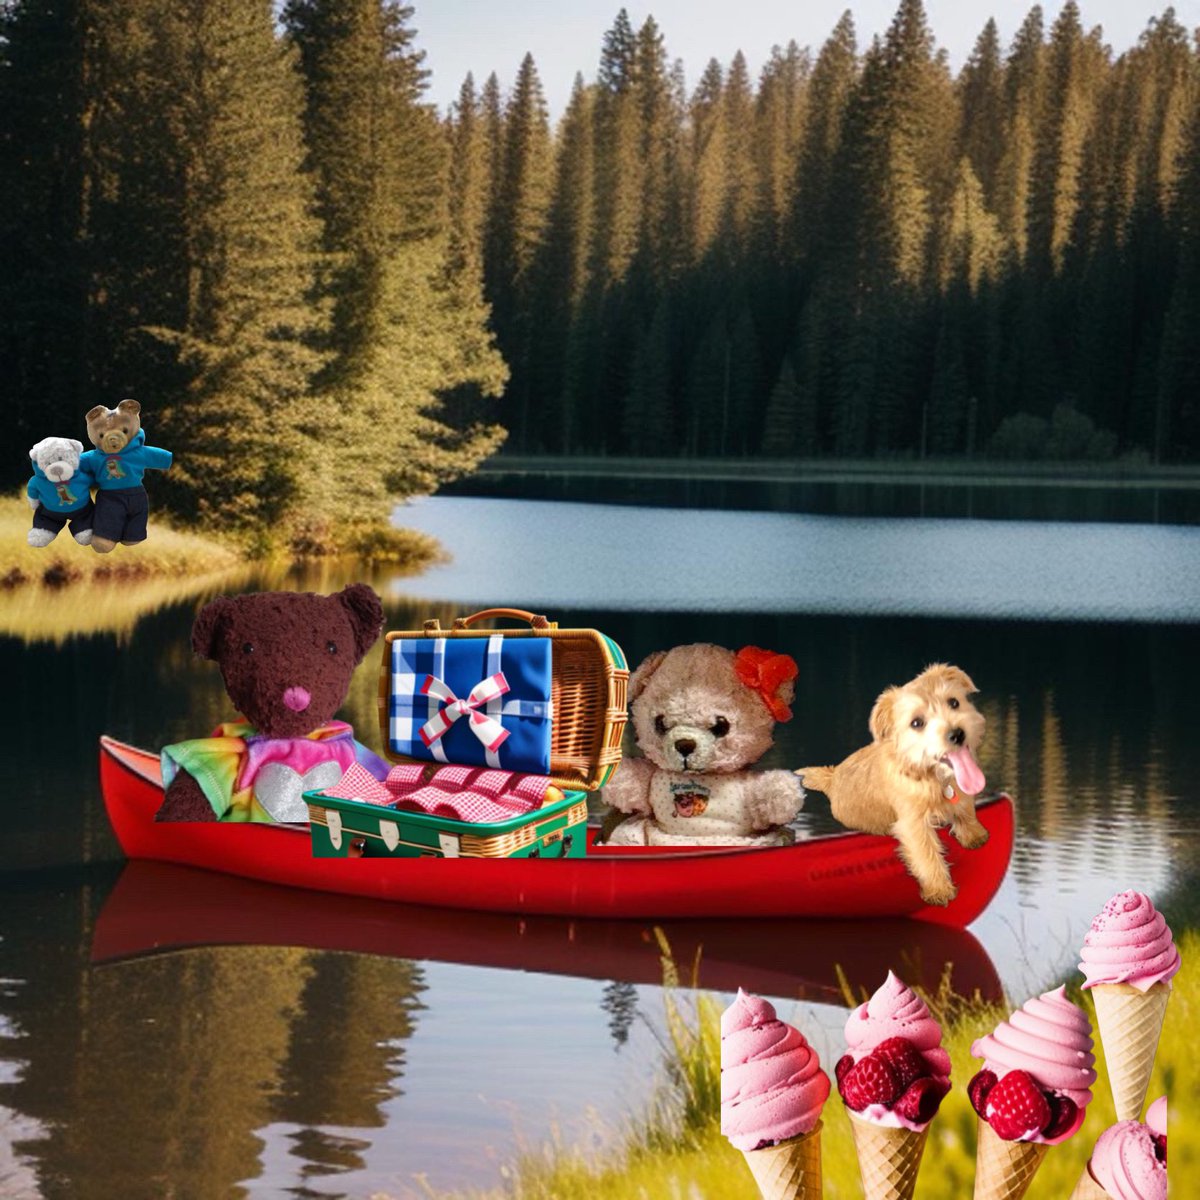 Raspberry @joans1963 in de stern of our canoe on 🇨🇦 lake, @JustTeddy15 and Youngun on shore gave us a push, Ian @BiddieBunnies an me is going to get dem ice creams! We forgotted paddles! #ZSHQ #Bears #Stuffies